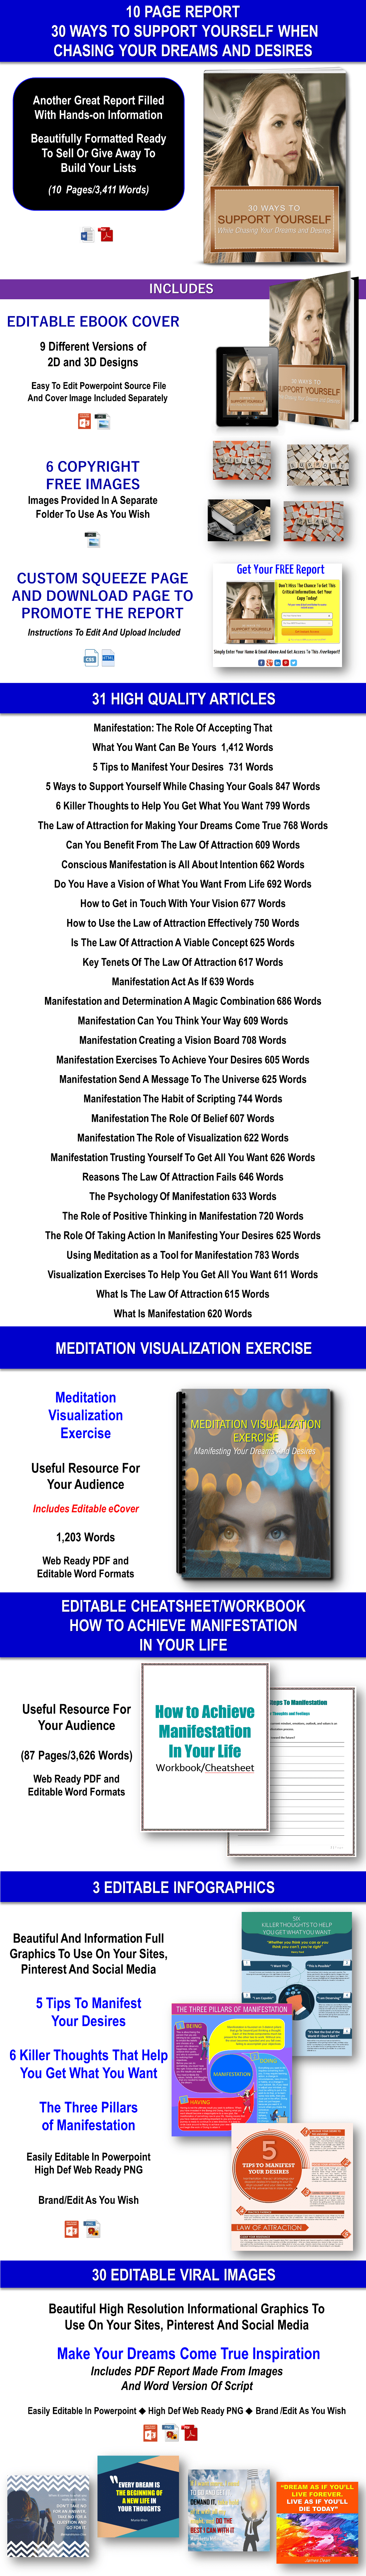 Manifestation and Law Of Attraction Content - PLR Rights